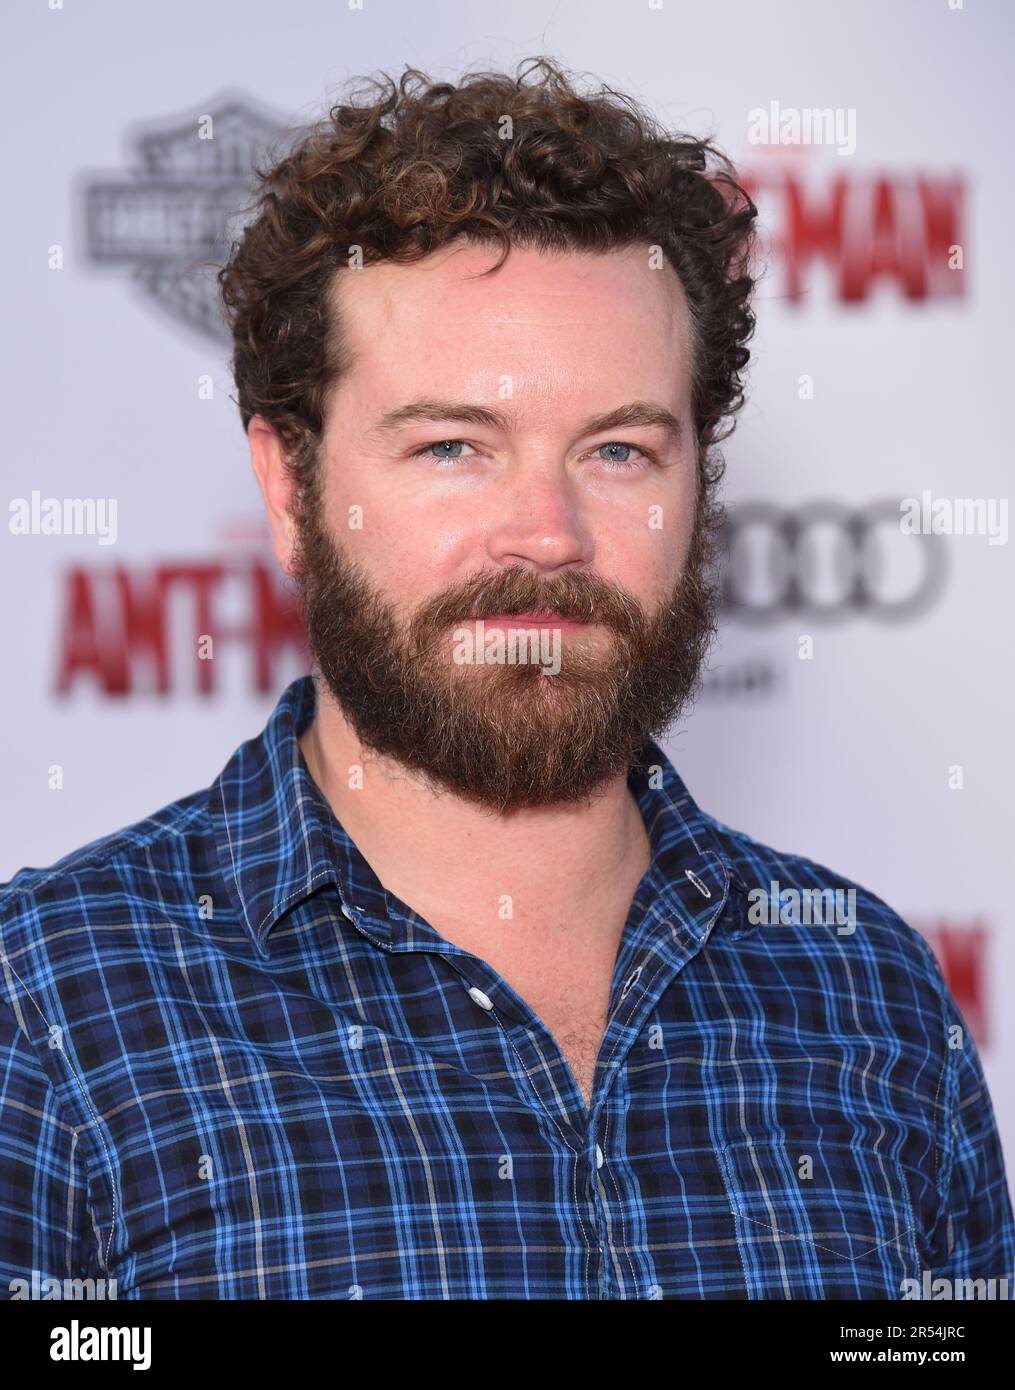 June 17, 2020, Los Angeles, California, USA: FILE PHOTO: Actor Danny Masterson, best known for 'That '70's Show' has been charged with raping three women between 2001 and 2003, the L.A. County District Attorney announced. PICTURED: June 29, 2015, Hollywood, California, USA: DANNY MASTERSON arrives for the premiere of the film 'Ant-Man' at the Dolby theater. (Credit Image: © Lisa O'Connor/ZUMA Wire) EDITORIAL USAGE ONLY! Not for Commercial USAGE! Stock Photo